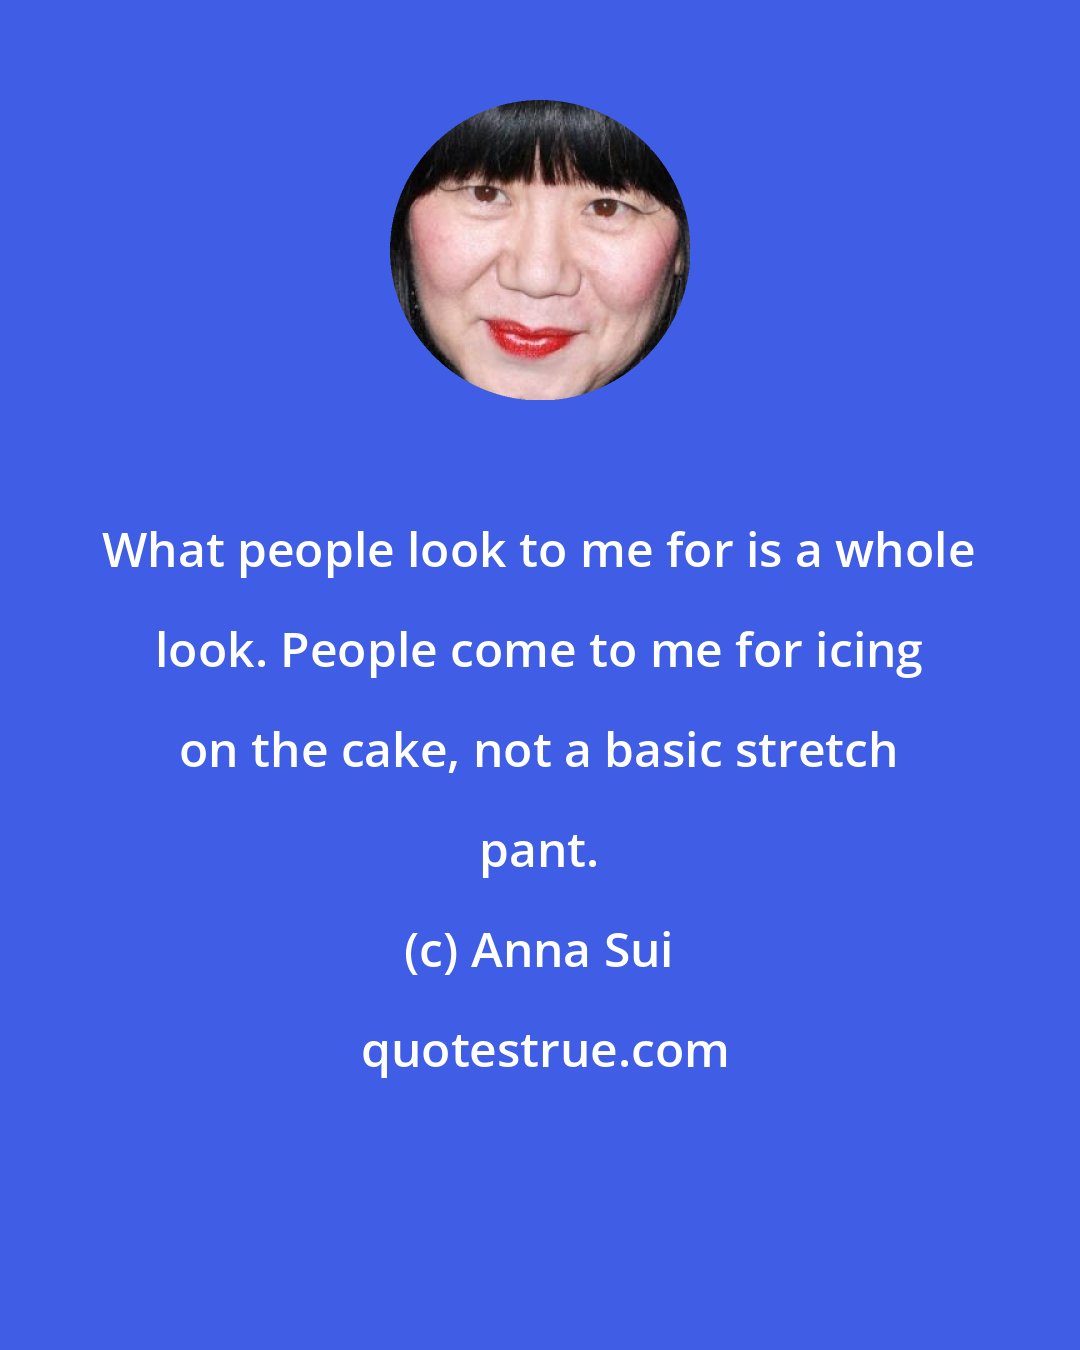 Anna Sui: What people look to me for is a whole look. People come to me for icing on the cake, not a basic stretch pant.